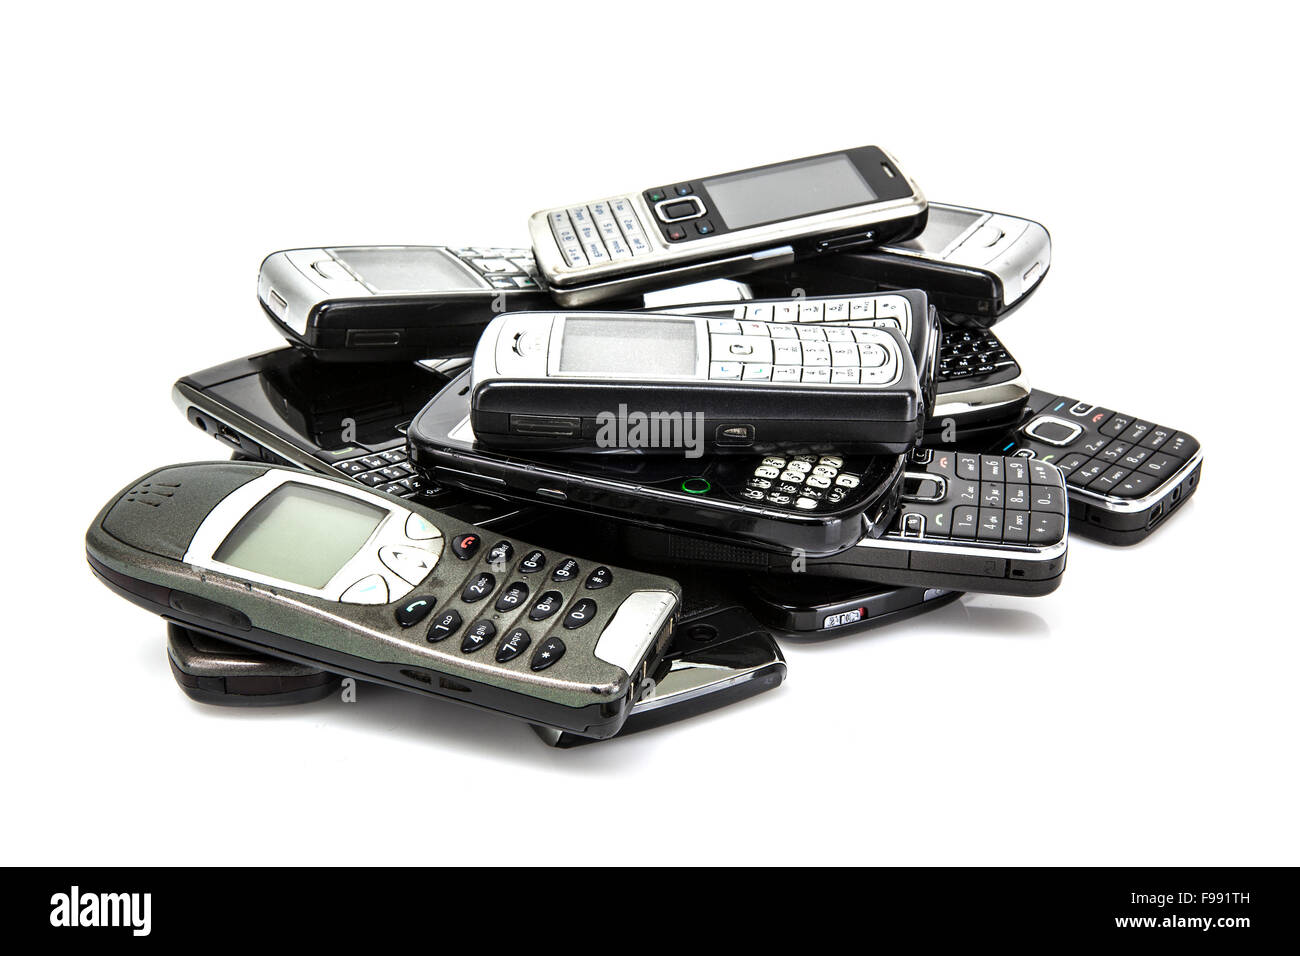 Pile of old mobile phones ready for recycling Stock Photo